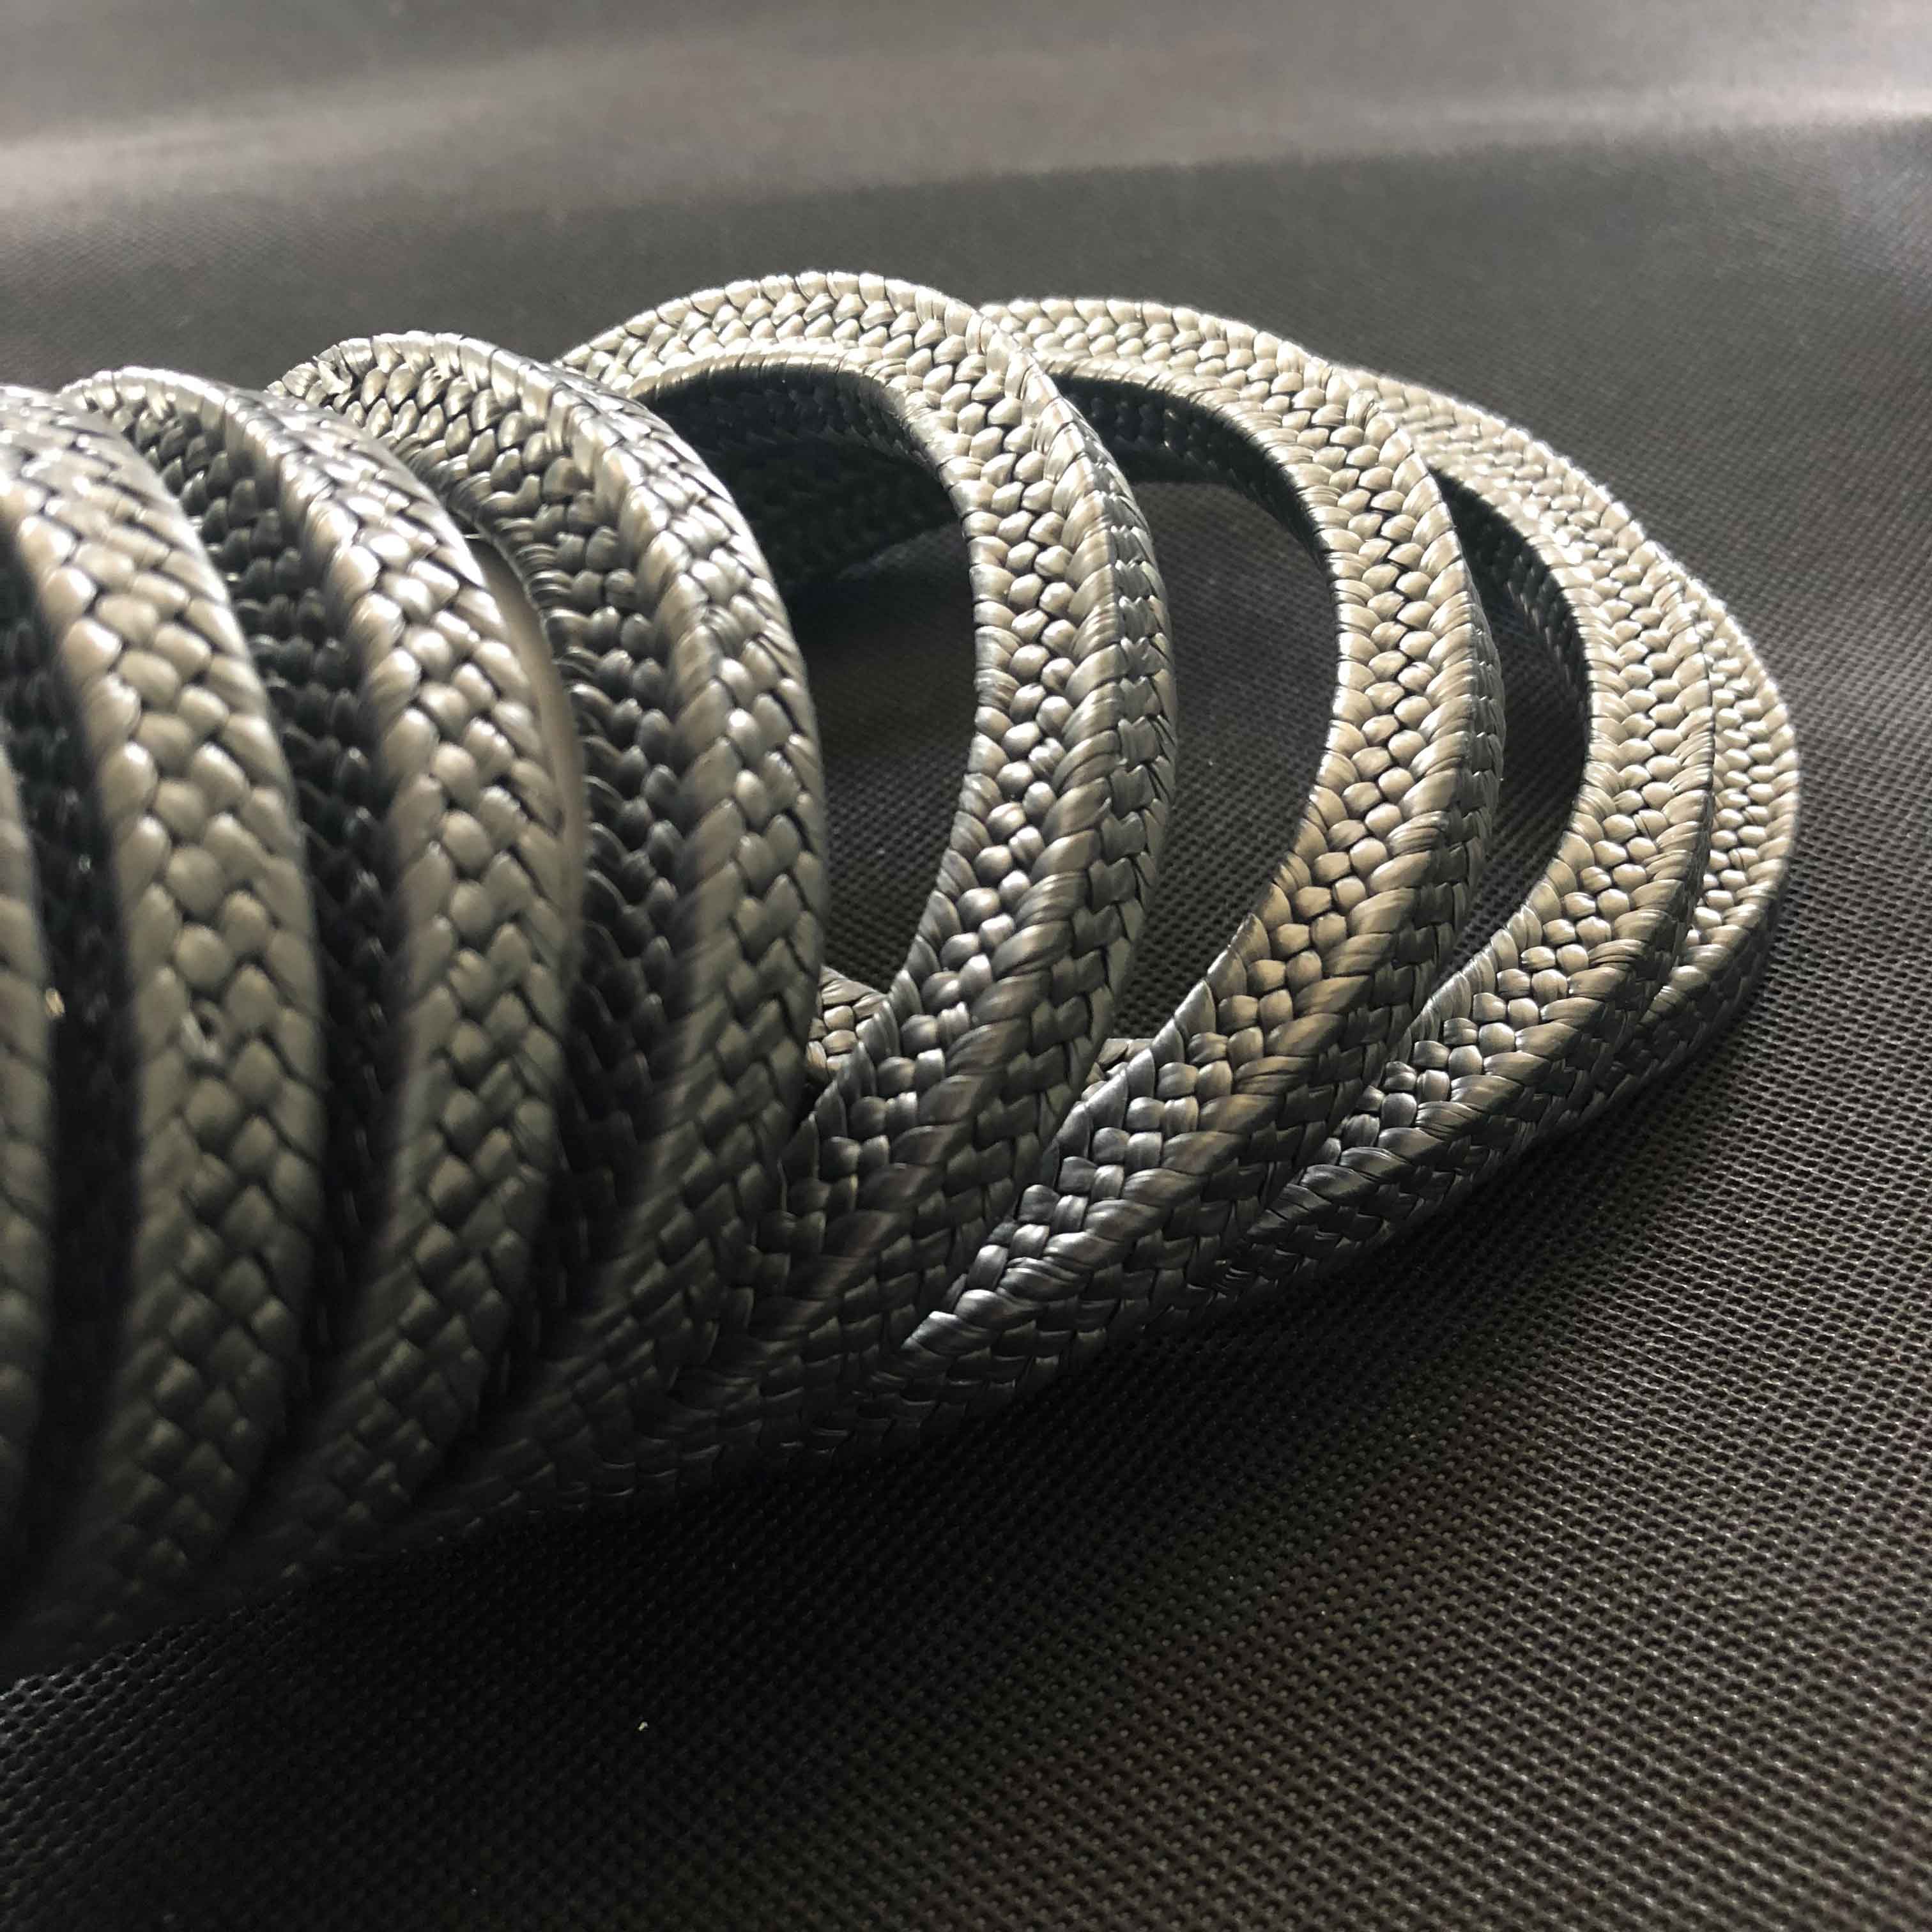 Material for Flexible Graphite Braided Packing from China manufacturer